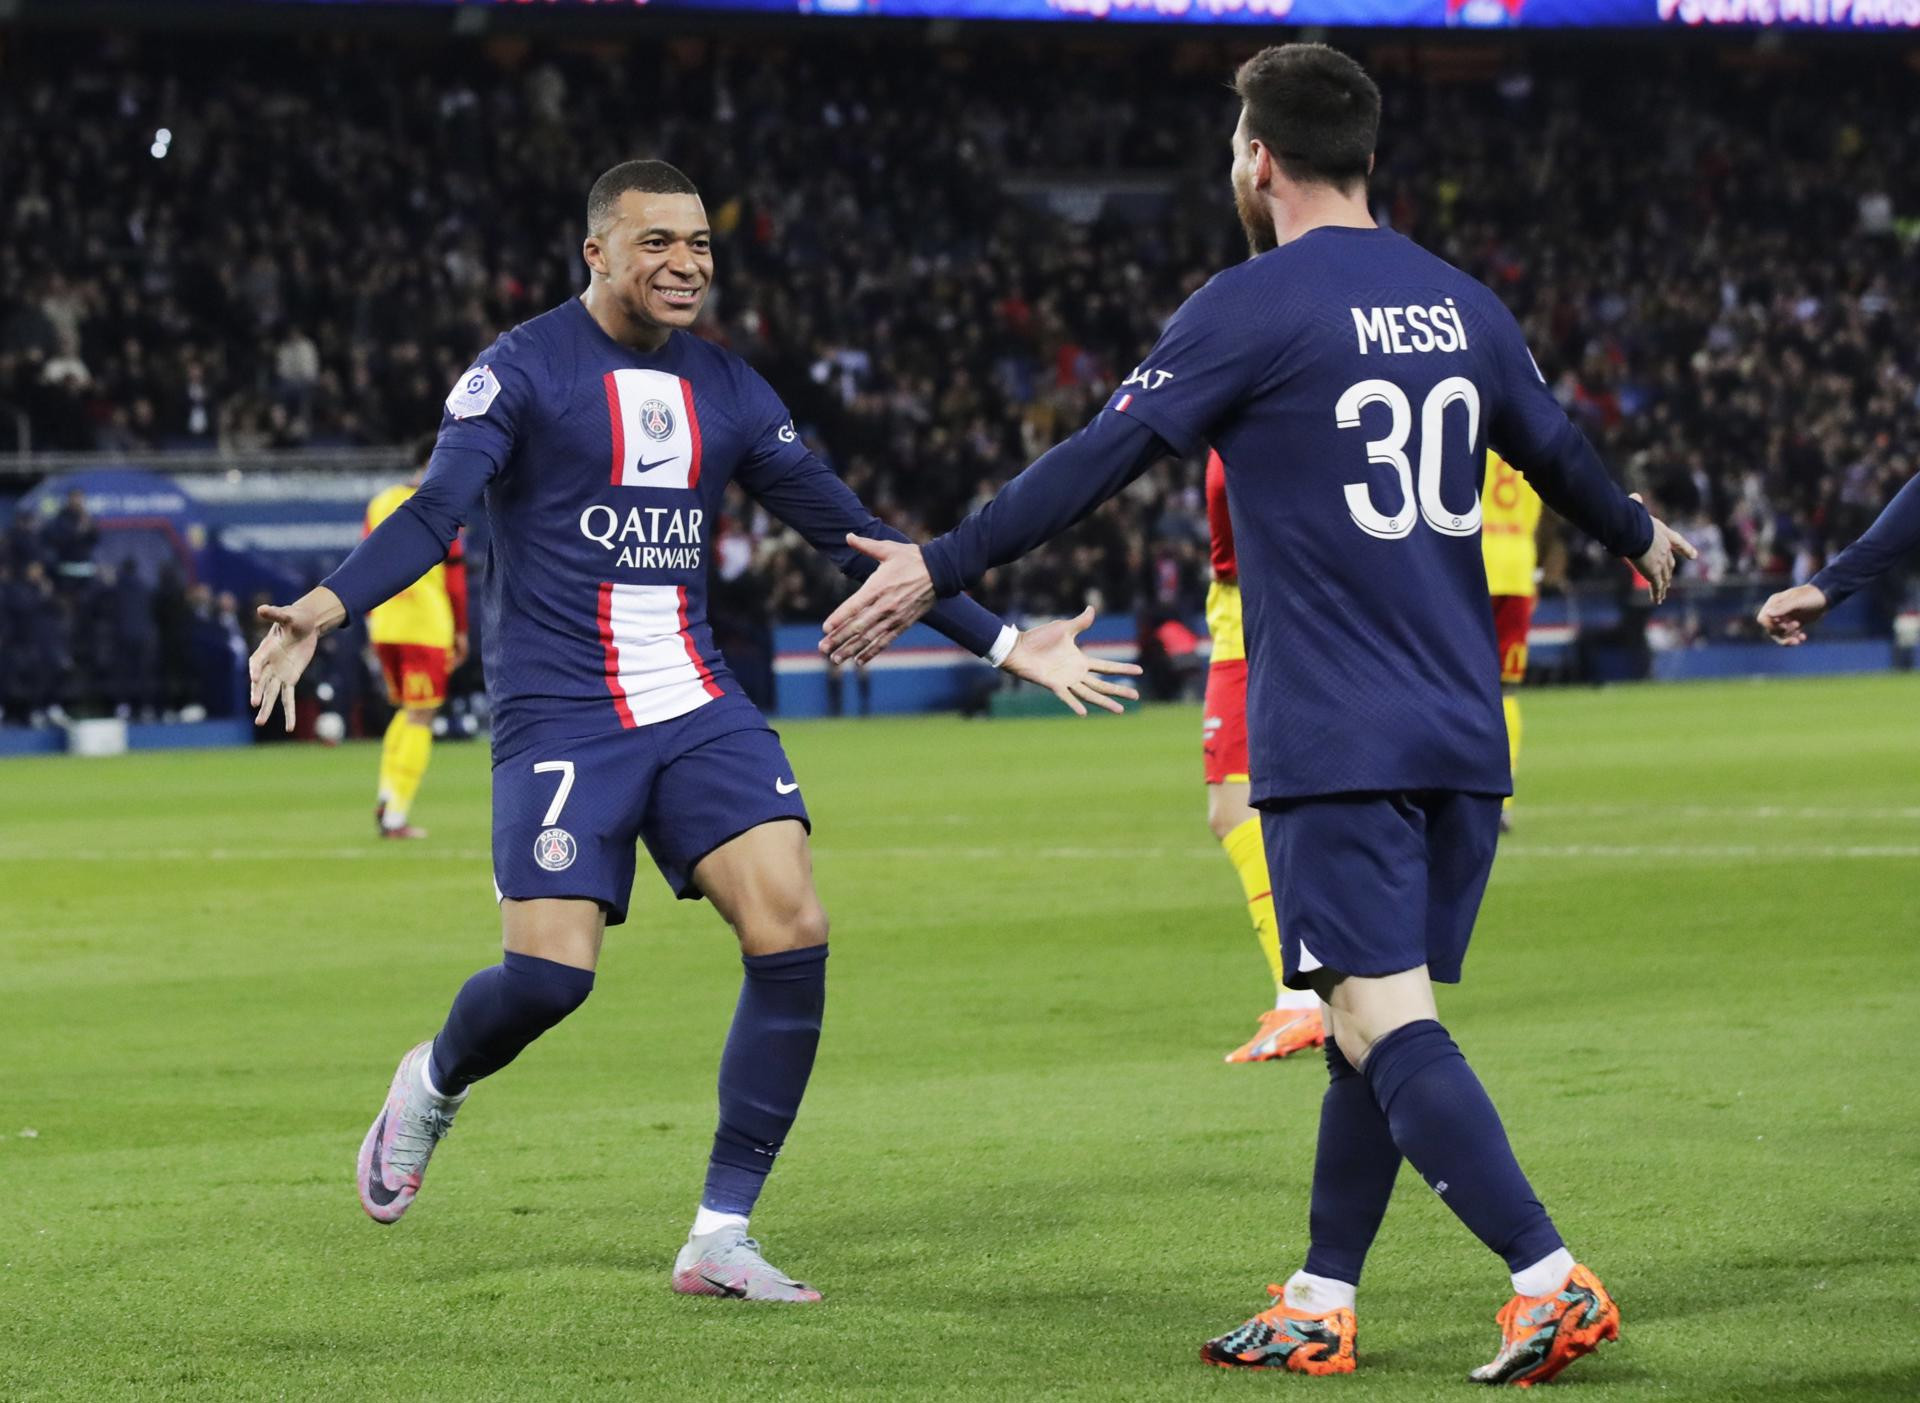 Messi stunner pushes PSG closer to Ligue 1 title